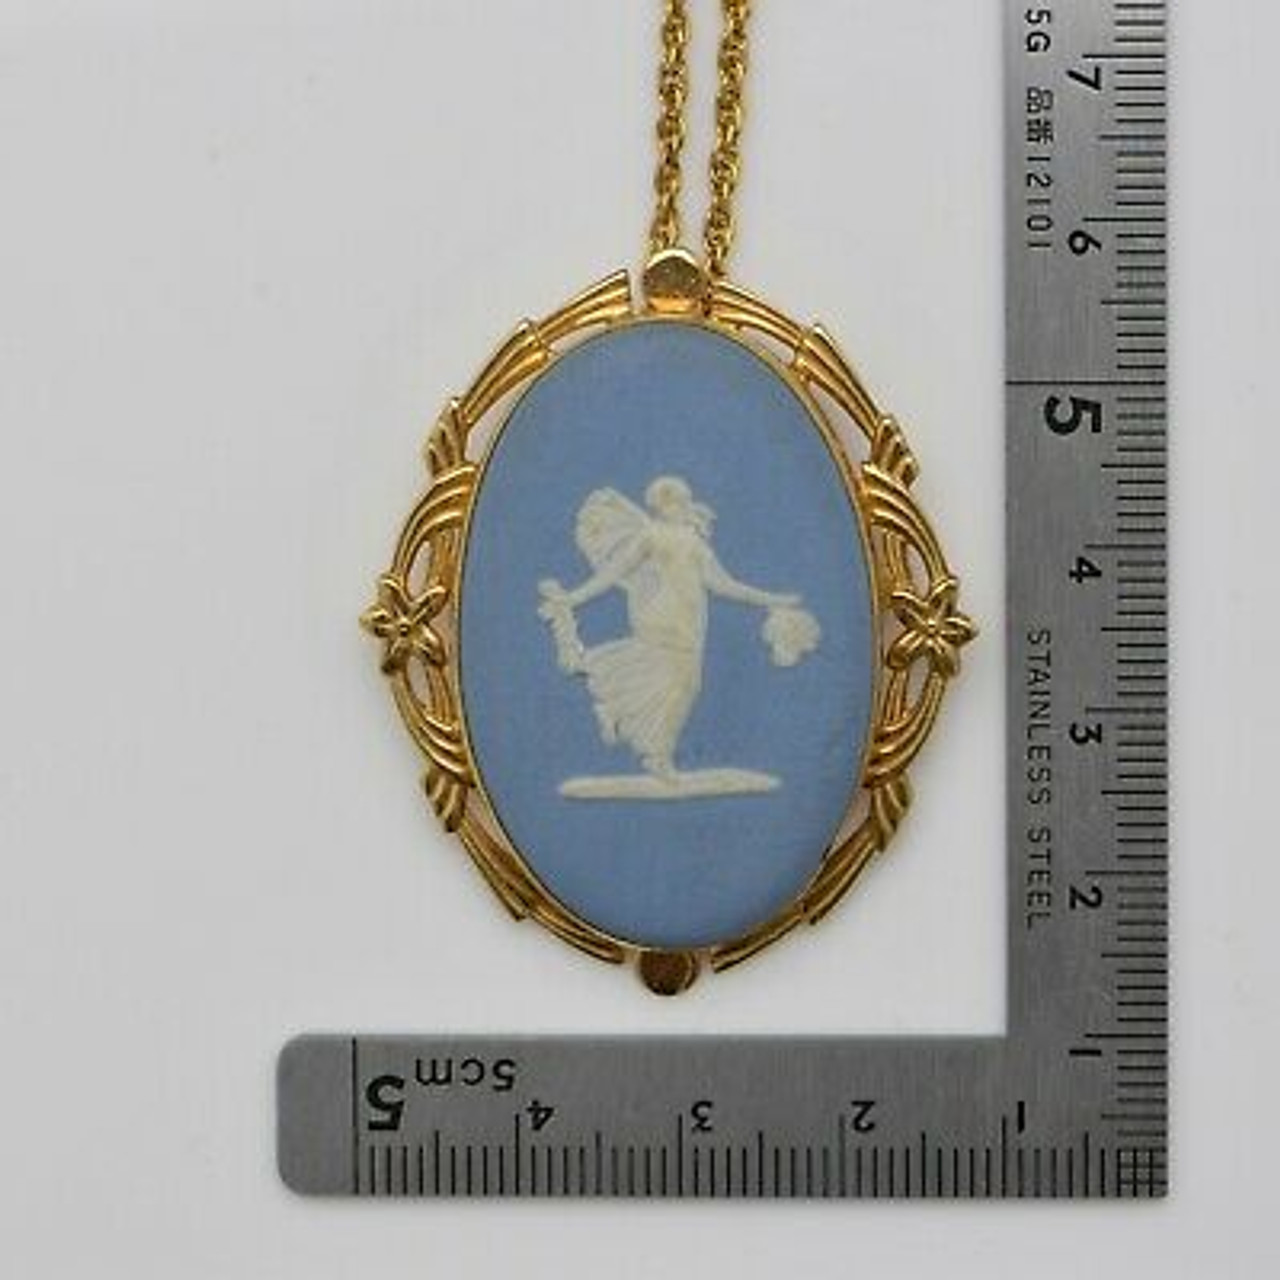 Vintage Wedgewood Pin Pendant Necklace with 26 Chain Gold Filled Circa  1960 - Colonial Trading Company